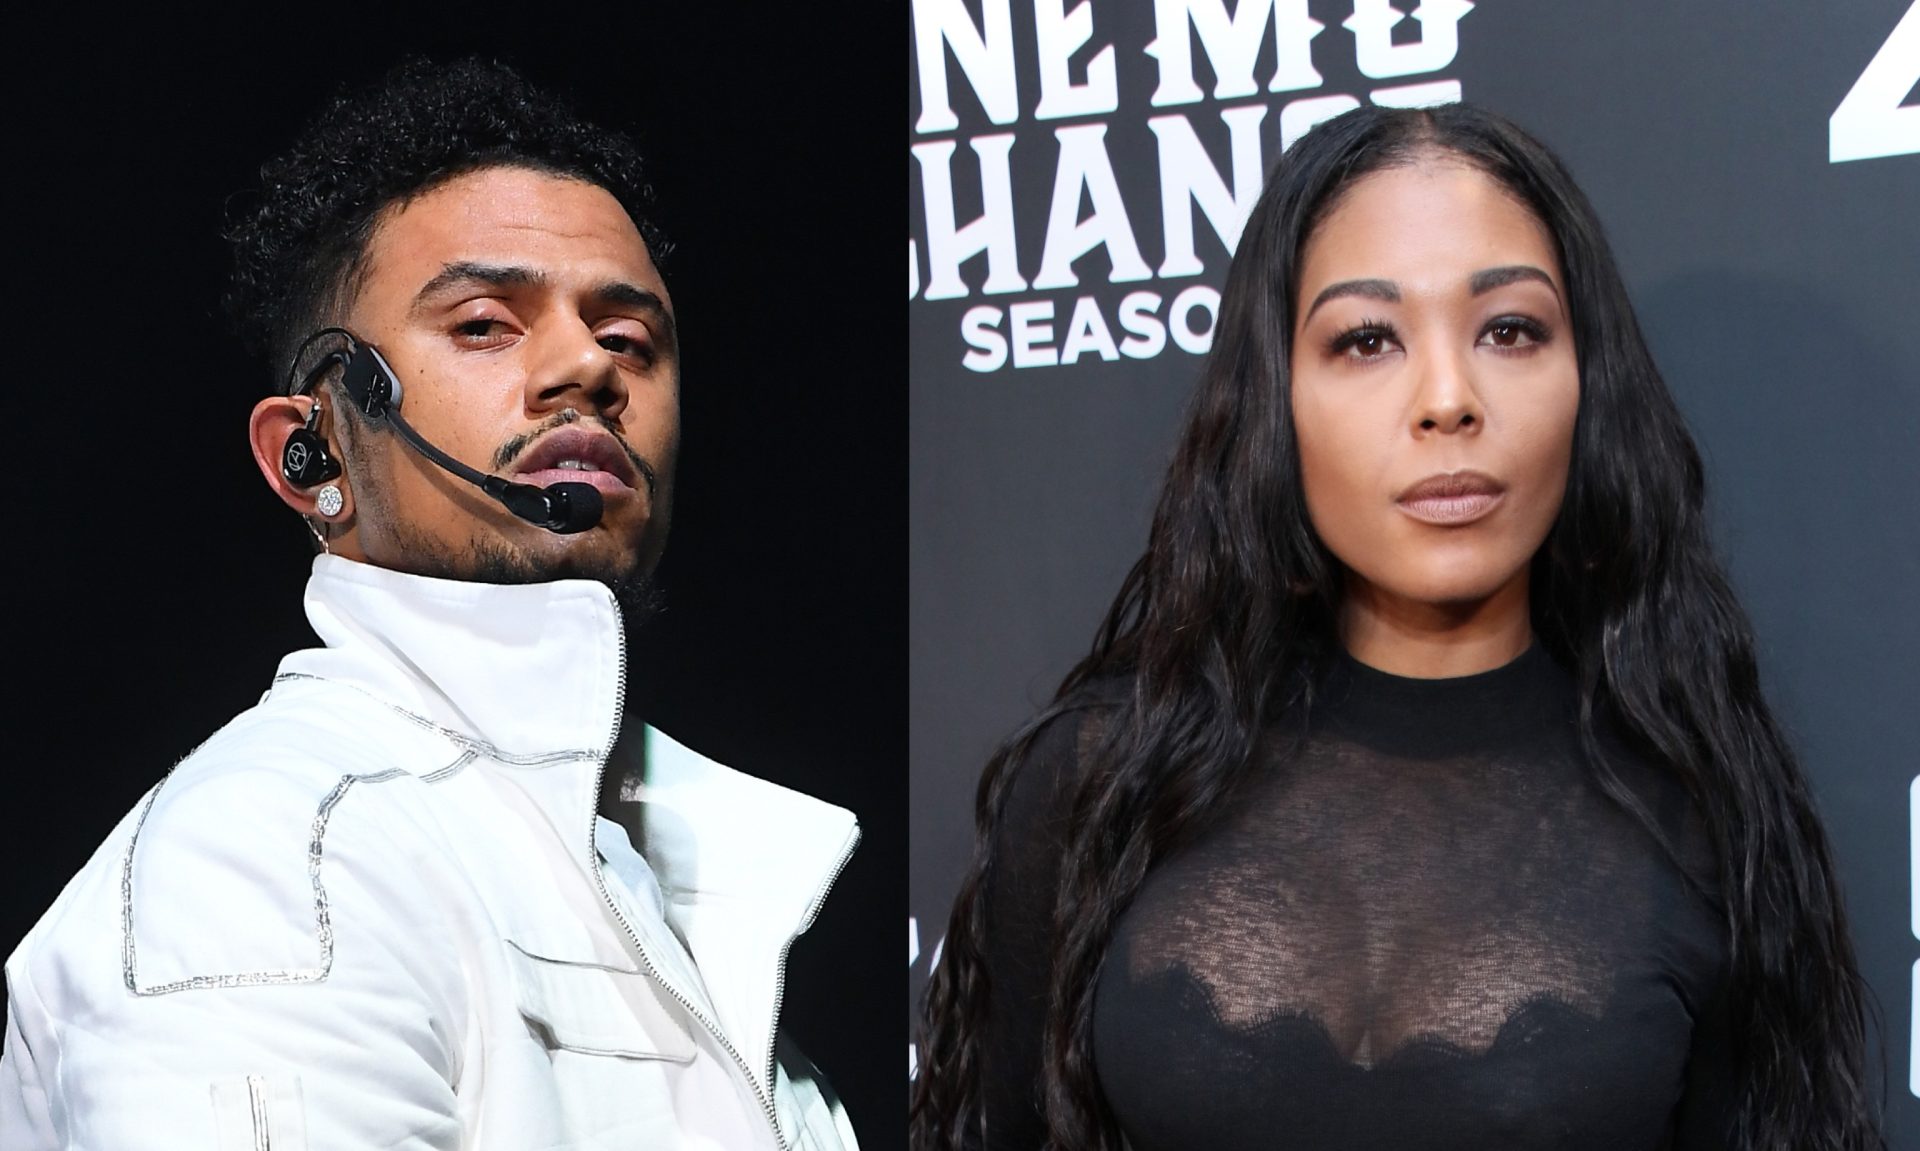 Lil Fizz Denies Nudes Are His After Son’s Mother Clowned Them